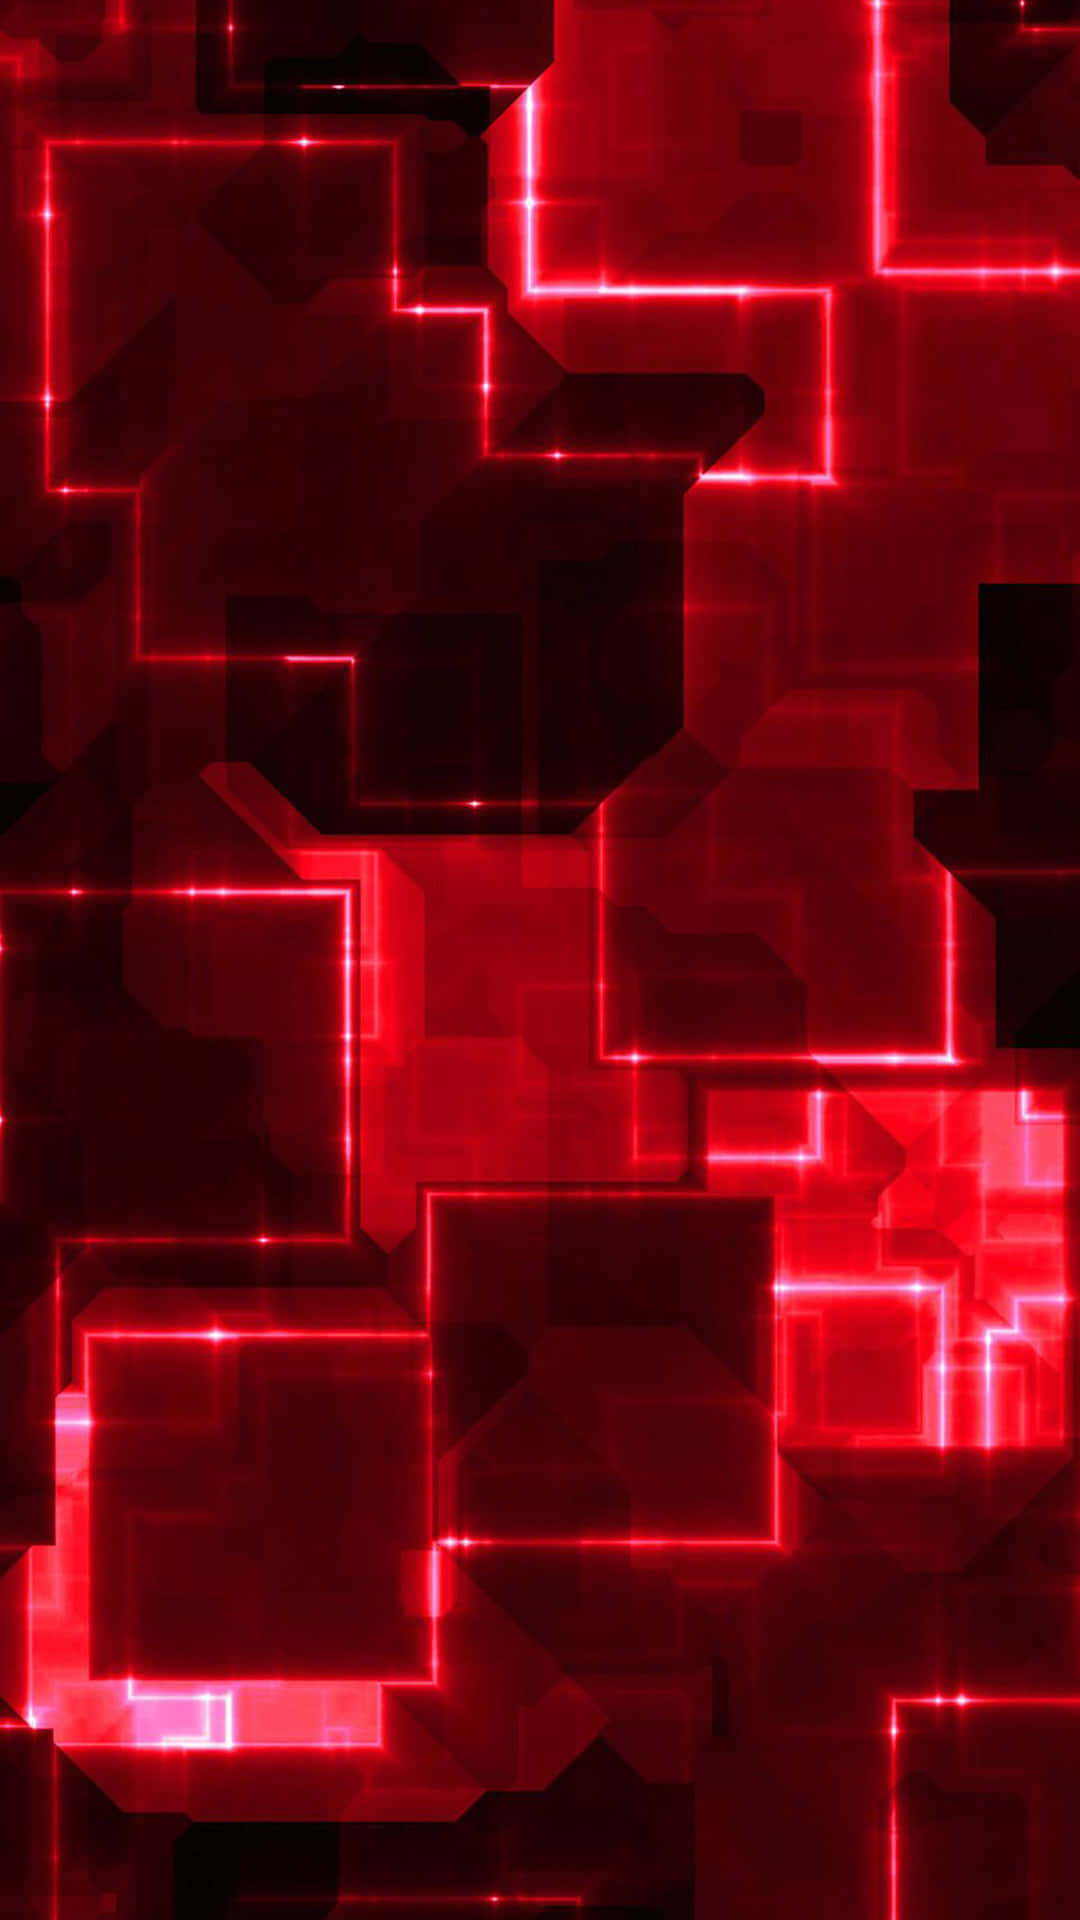 Abstract Geometric Shapes Aesthetic Red Background